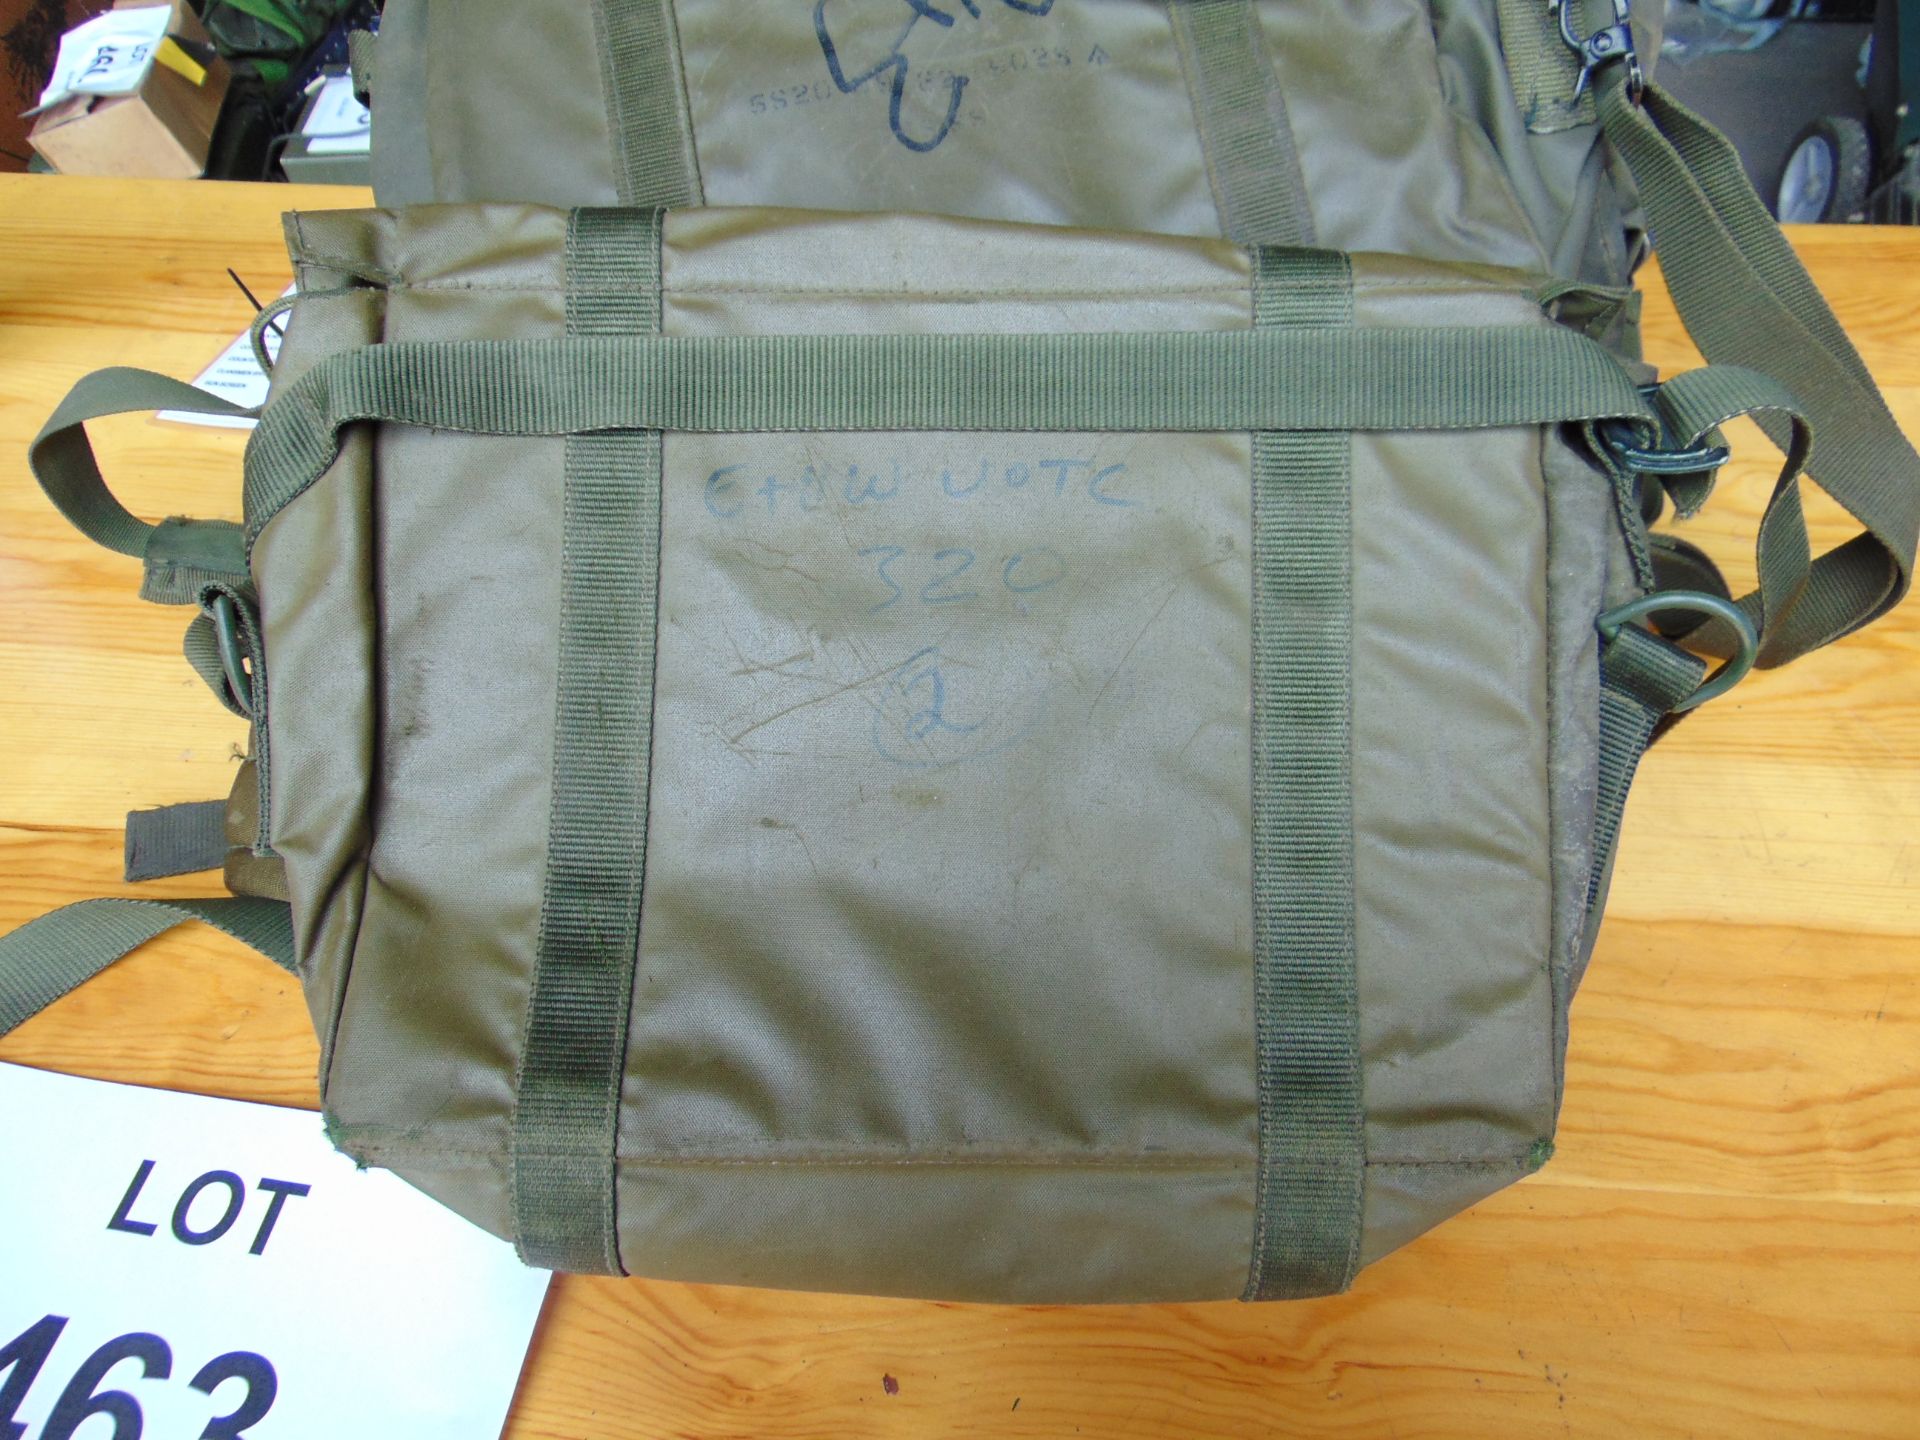 6x Clansman Radio Accessory Bags - No Contents - Image 3 of 4